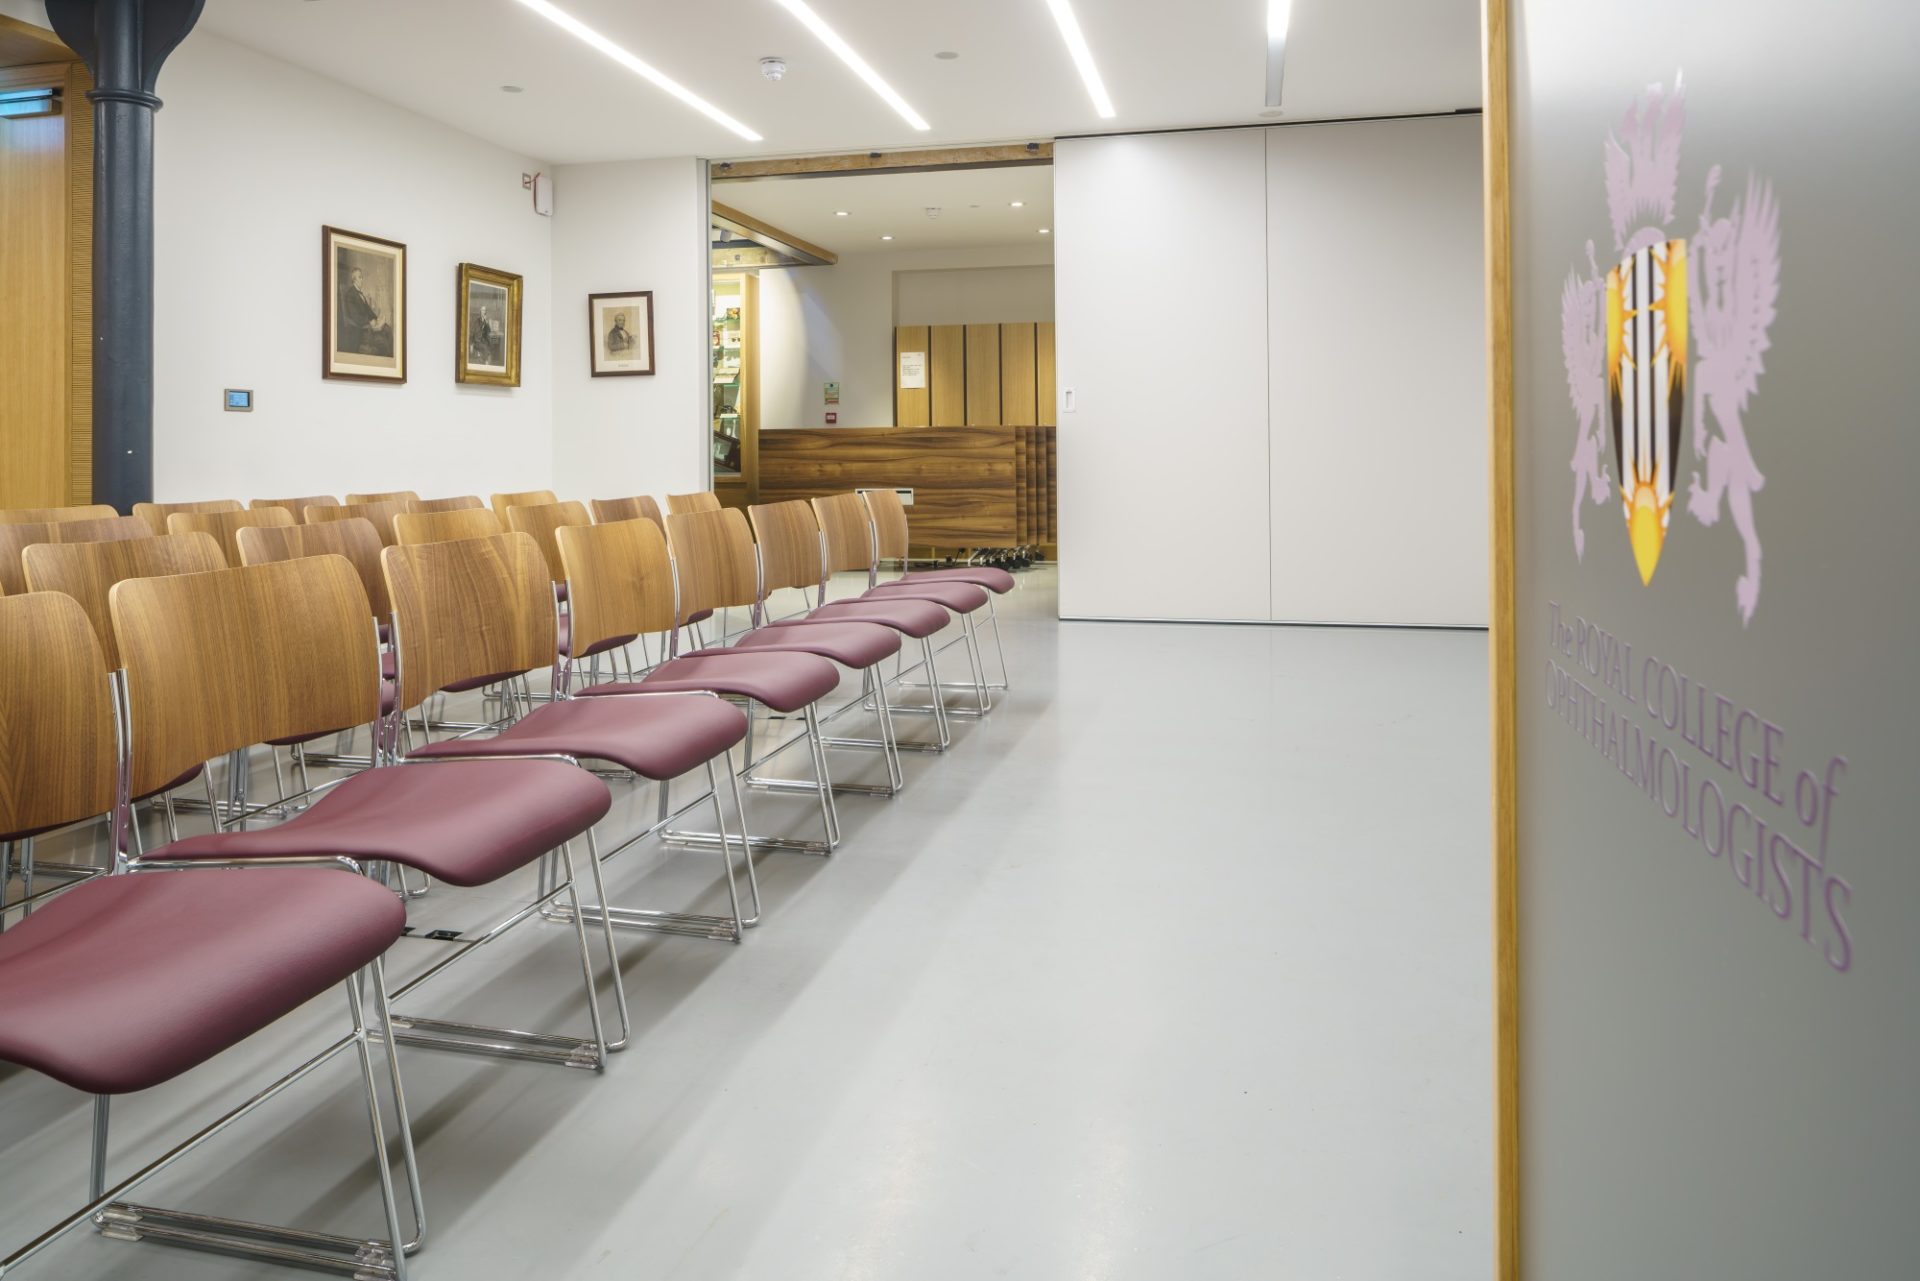 Noise absorbant flooring at Royal College